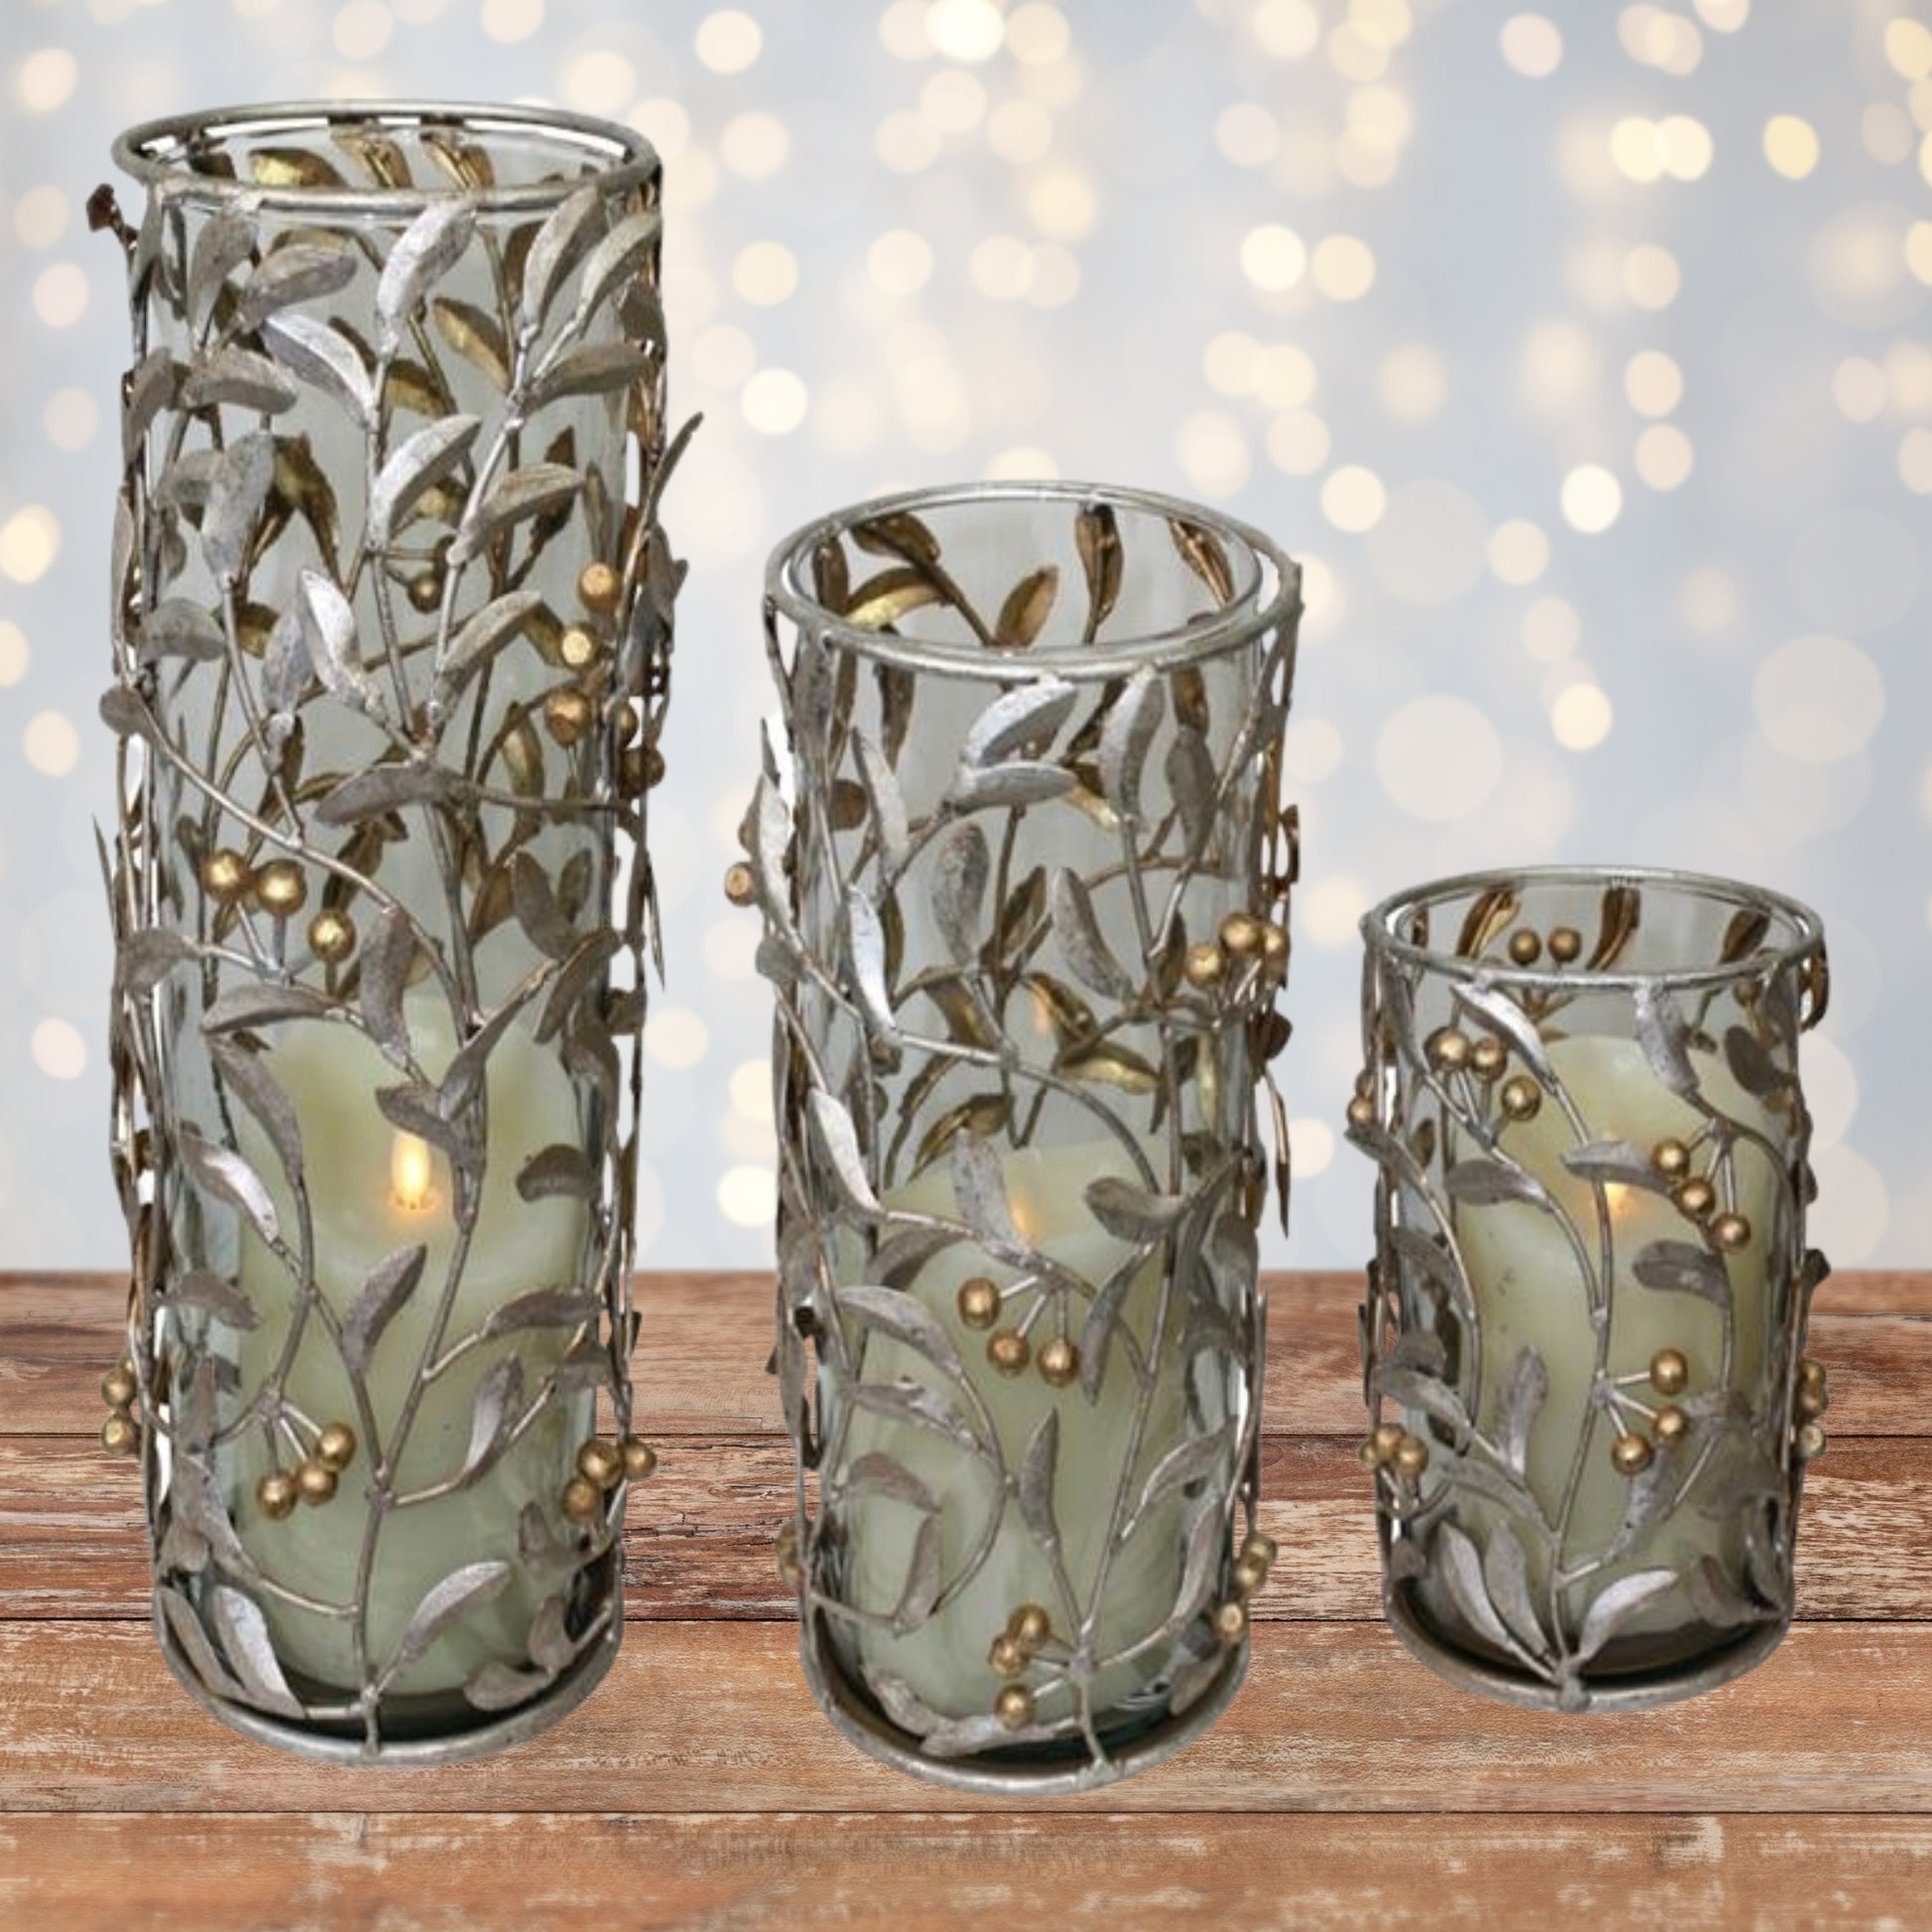 Silver and Gold Iron Hurricanes - Leaf & Berry Accented Iron & Glass Candle Holders - 3 Sizes to Choose From | Iron Candle Holders shown on wood table in front of twinkling lights | Christmas Decor | INSIDE OUT | InsideOutCatalog.com